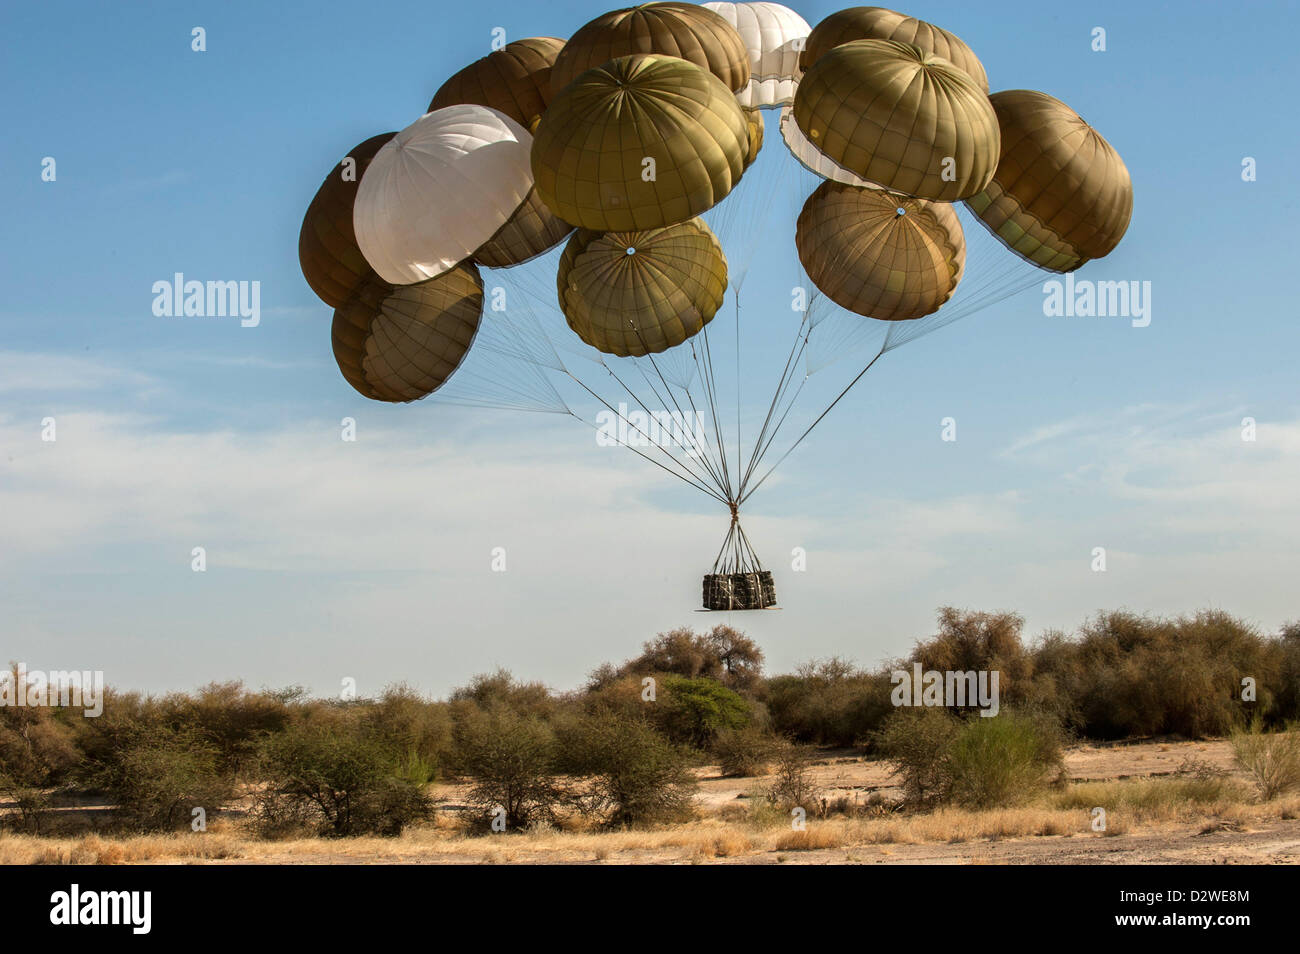 (HANDOUT) A handout provided by the French Army from the French Army Communications Audiovisual Office (ECPAD) shows paratroupers jumping out of an aircraft and landing in Timbuktu, Mali, 29 January 2013. The paratroupers will prepars a landing stip there. The French Army has penetrated areas further north in the country during the conflict with Islamic rebels in Mali. Photo: PHOTO: OLIVIER DEBES/ECPAD/HANDOUT (HANDOUT EDITORIAL USE ONLY) Stock Photo